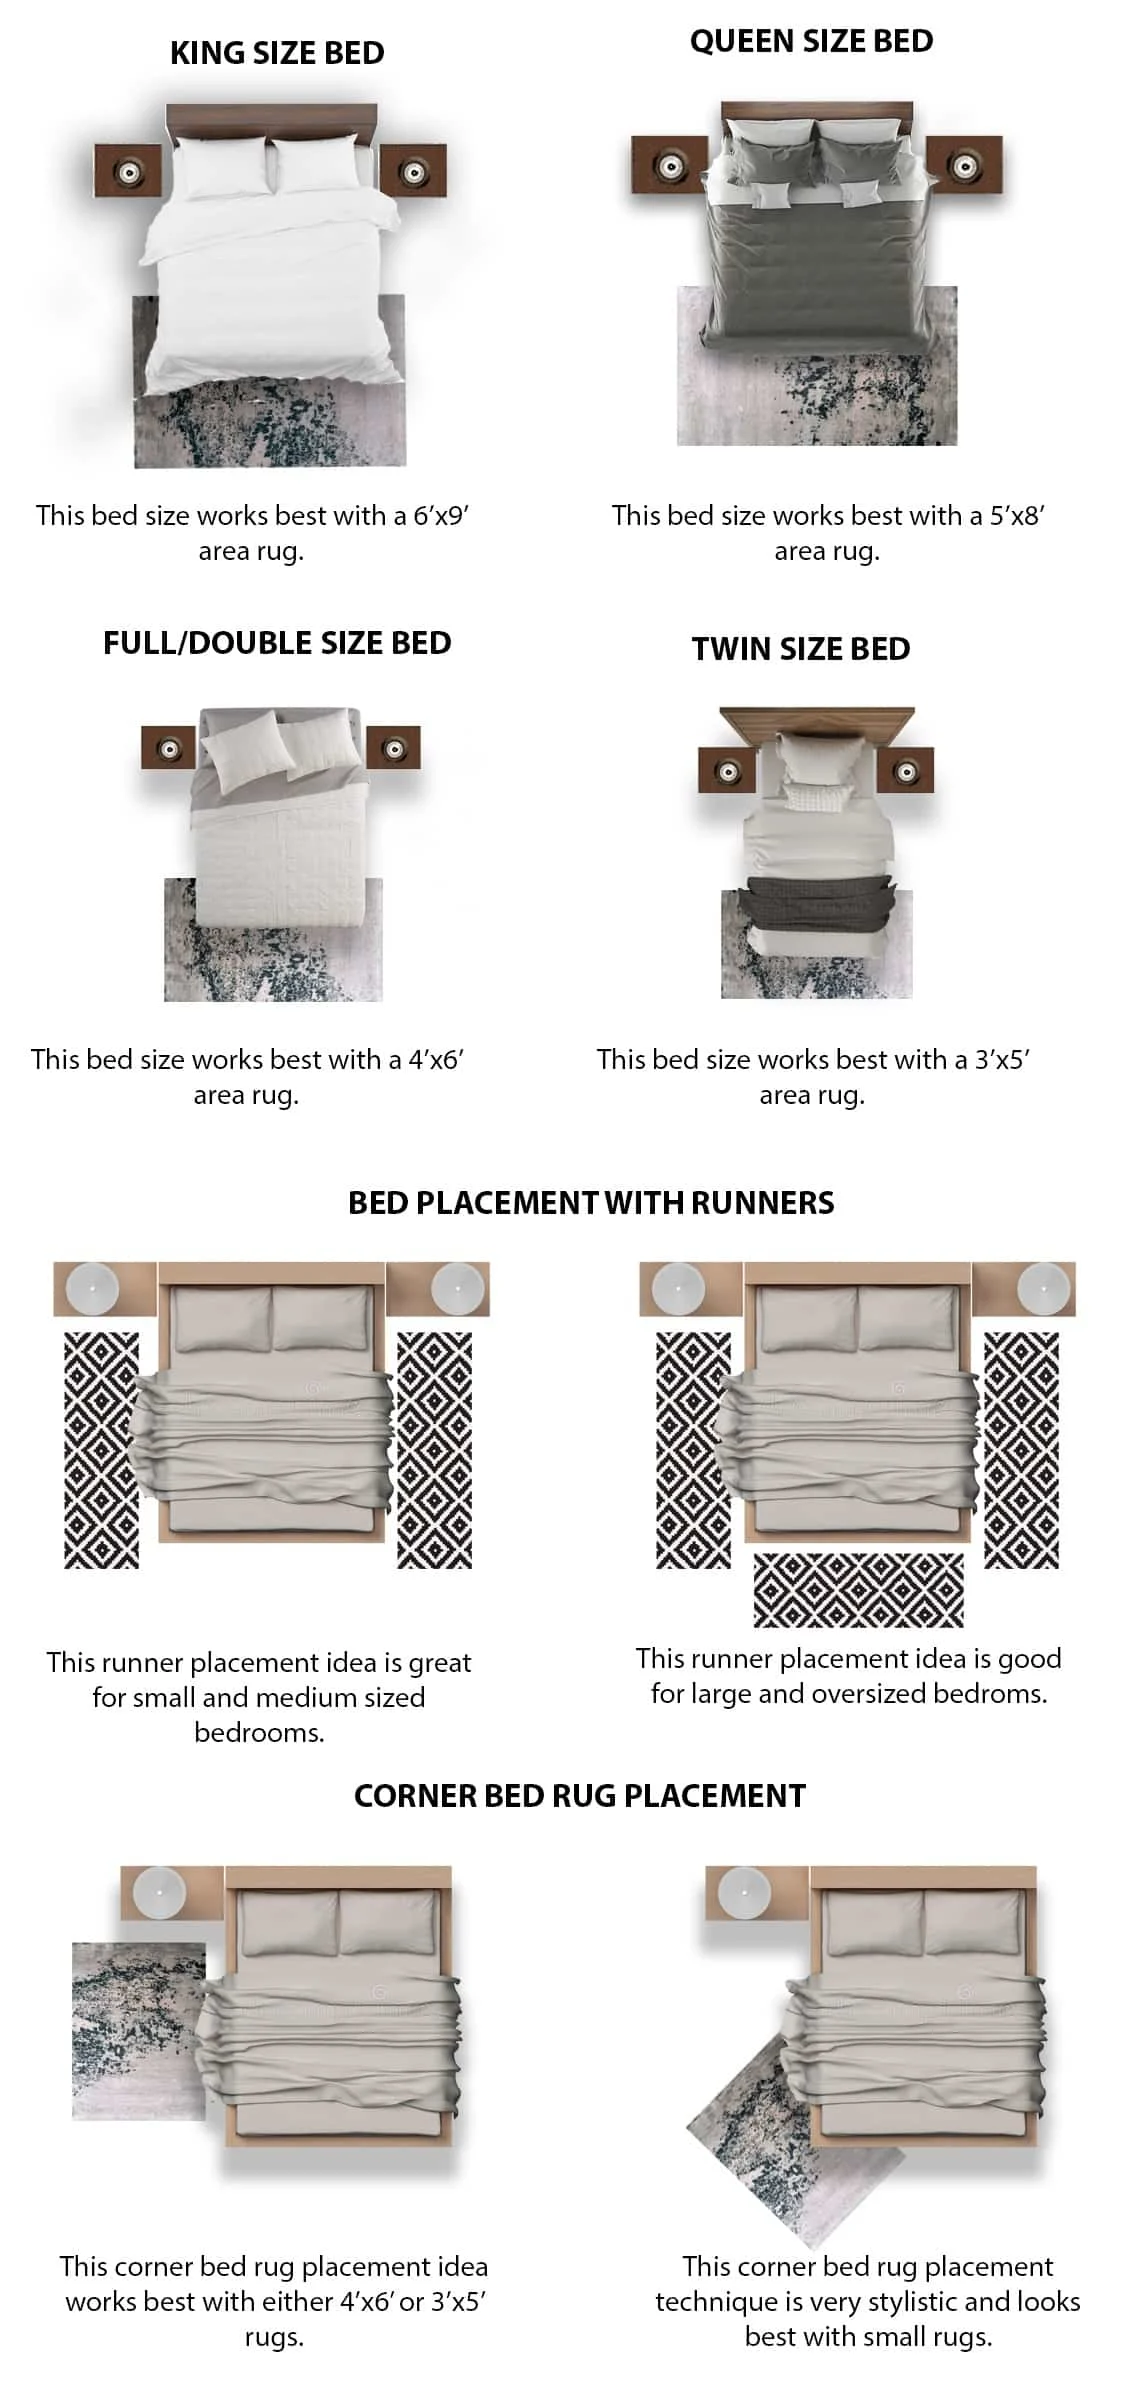 Bedroom Rug Placement and Layouts for King, Queen, Full (Double), Twin, Corners and with Runners